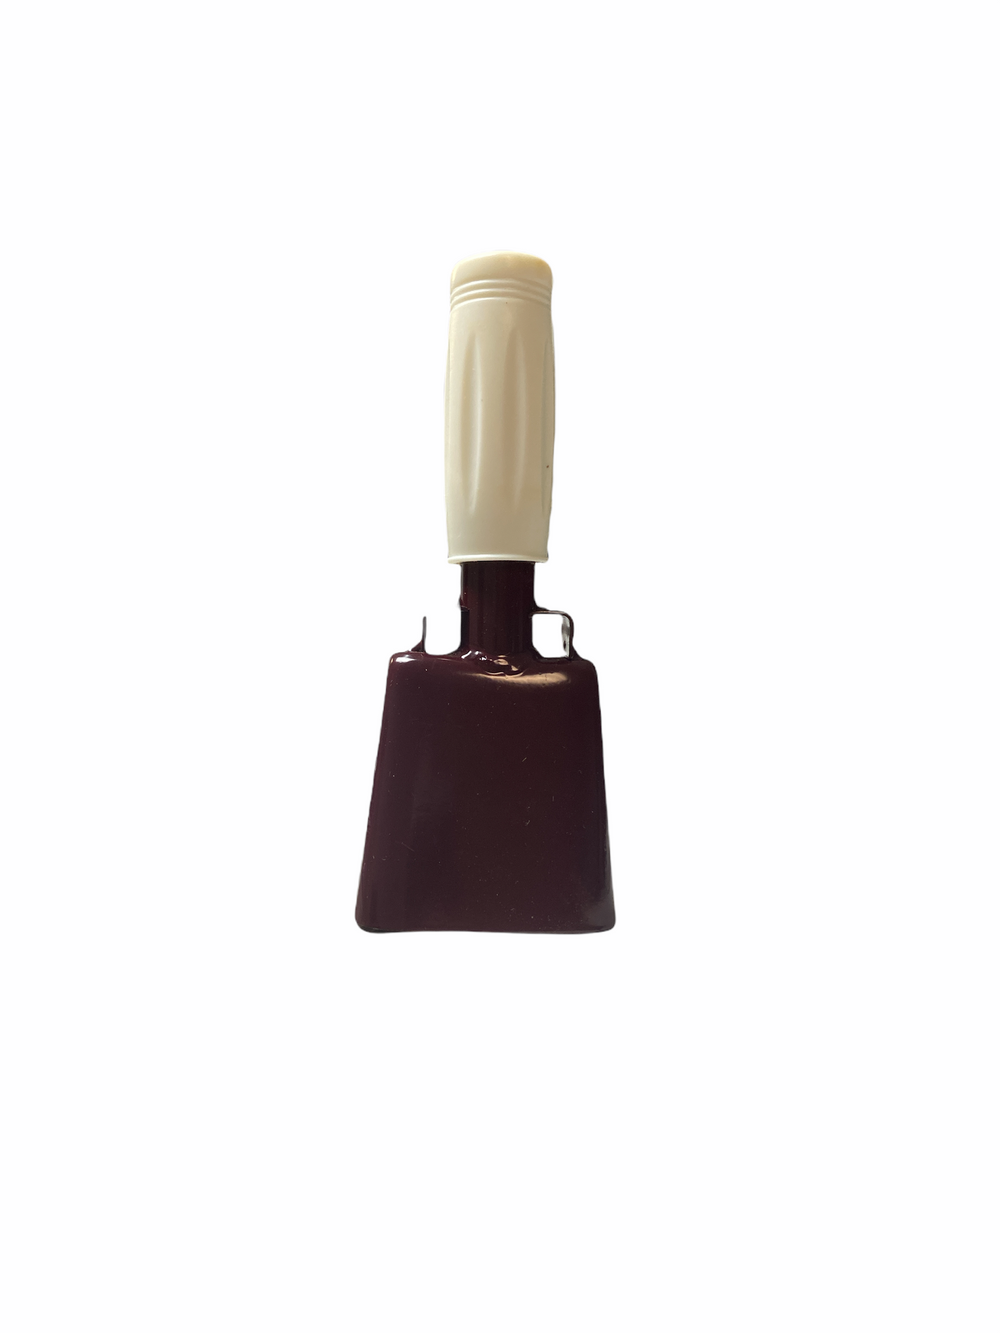 Bullybell Maroon Small - Mississippi State Tailgate Supply